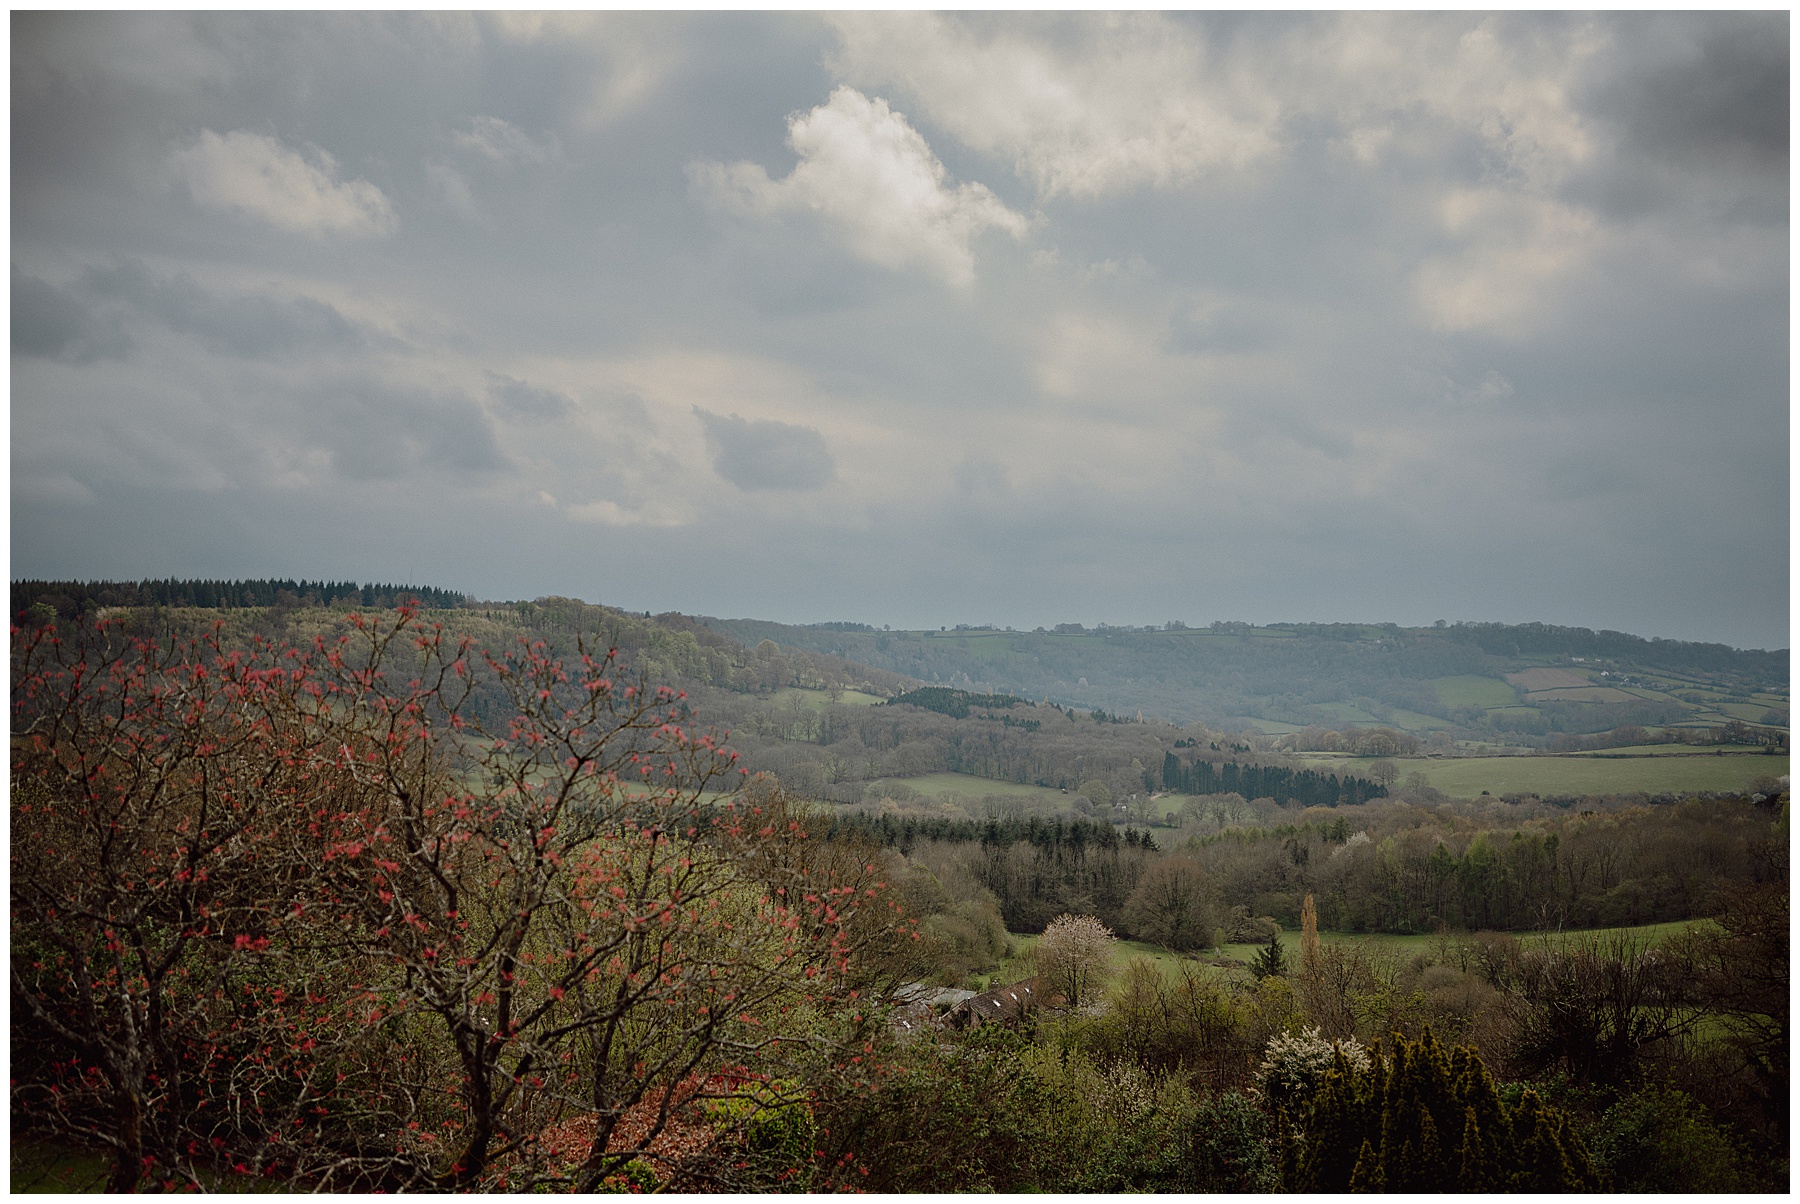 View from Caer Llan Monmouth